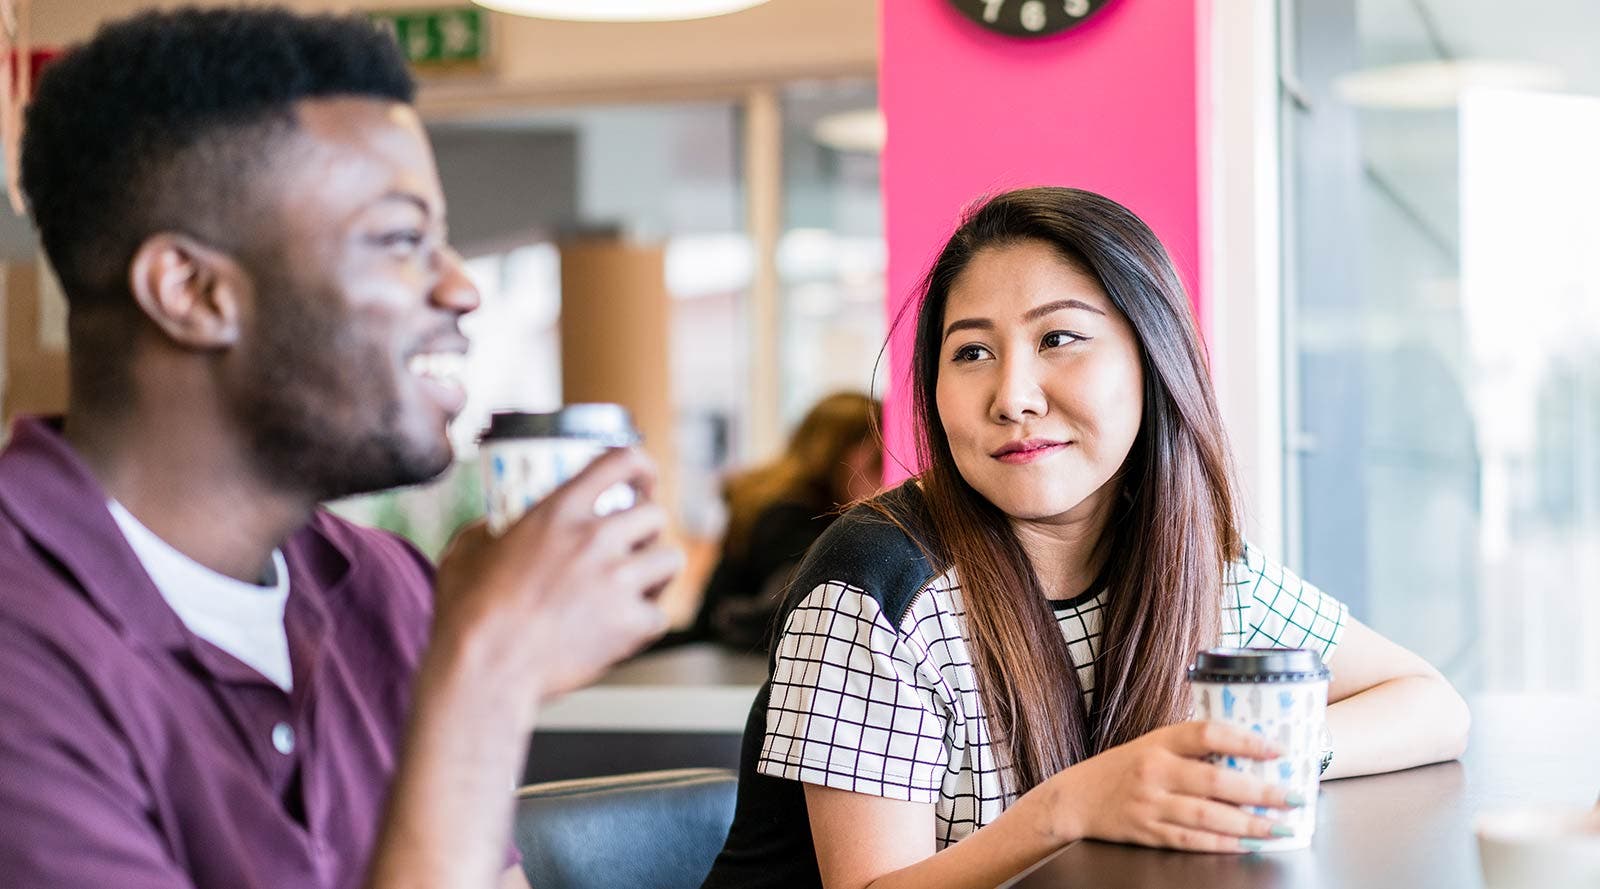 Surrey students drinking coffee together